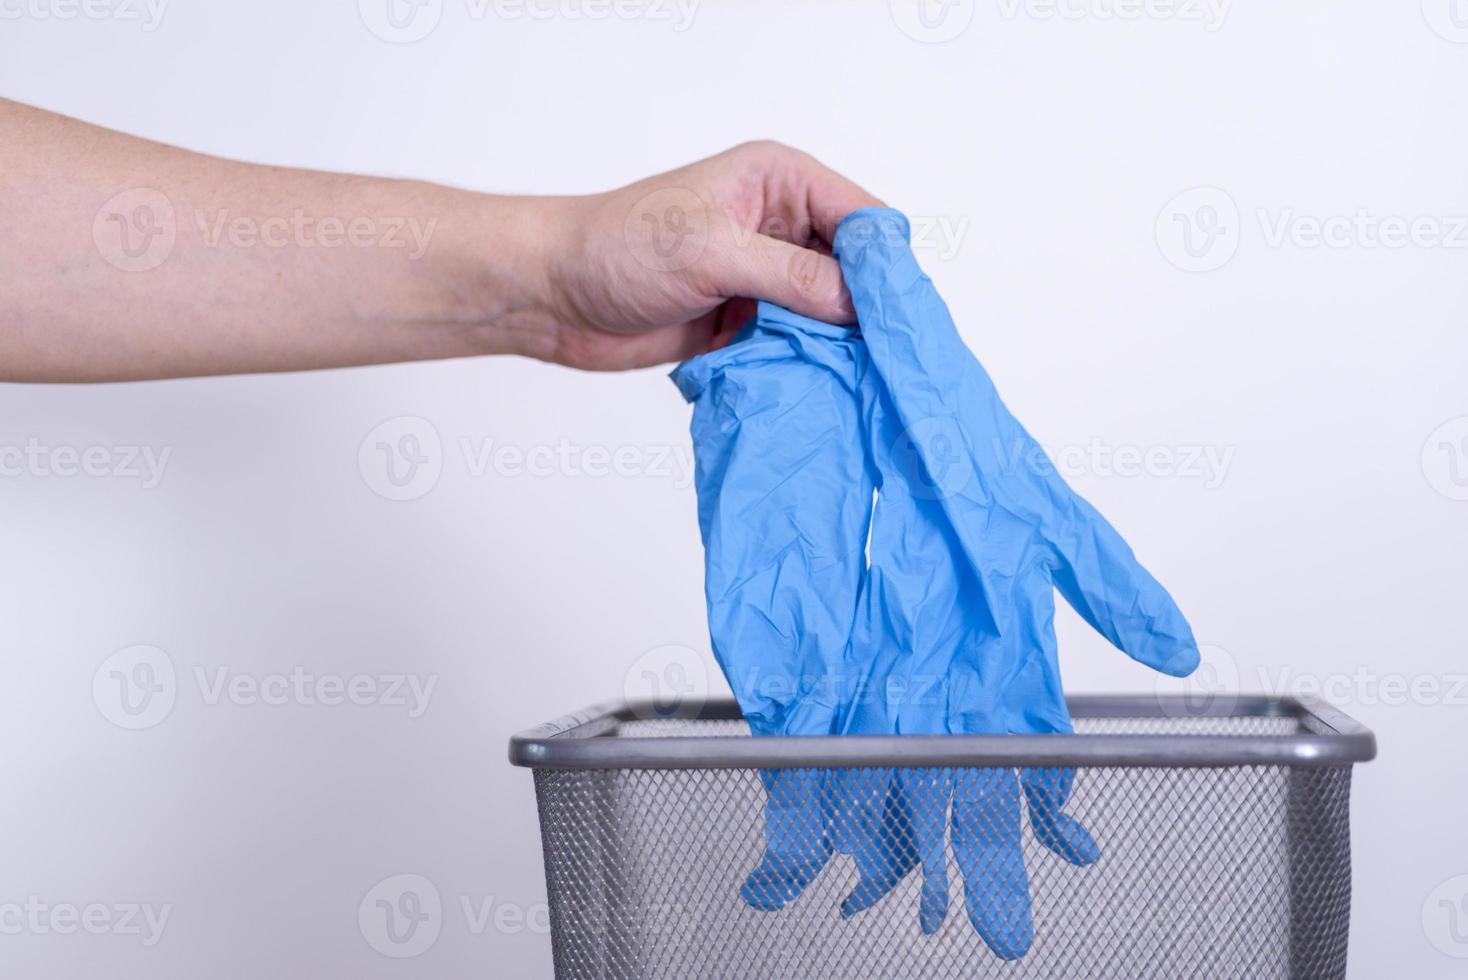 A man's hand throws blue medical gloves into a trash can against a gray background. photo